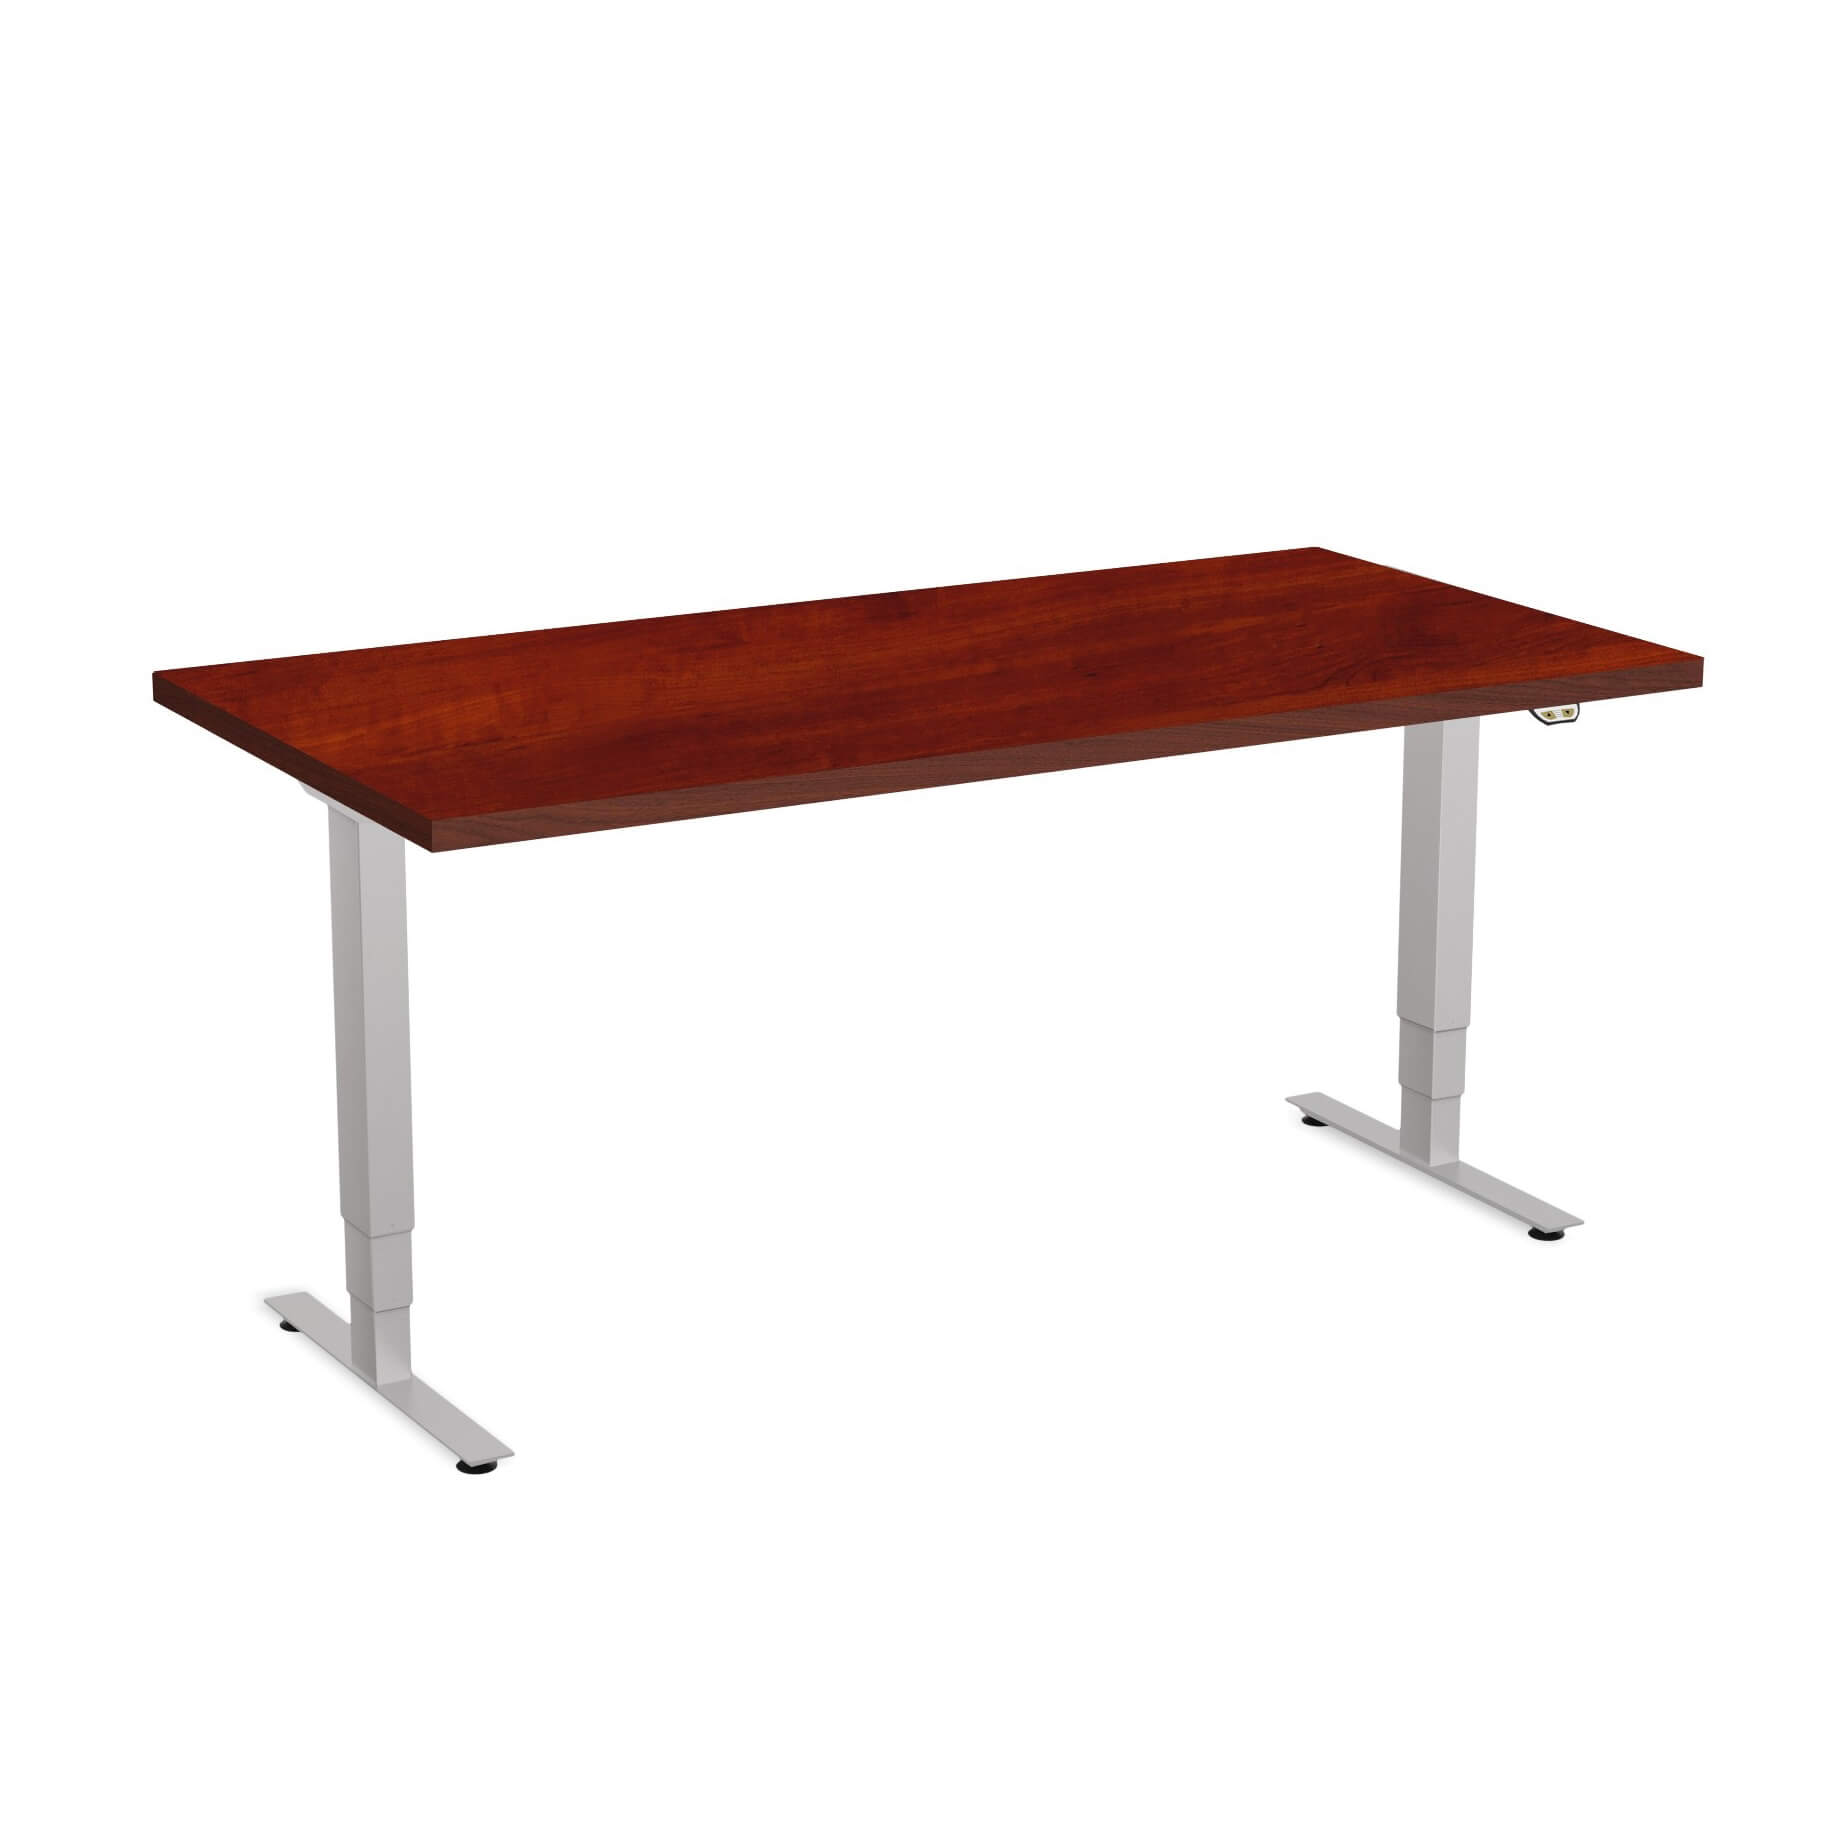 sit-stand-desk-height-adjustable-table-electric.jpg